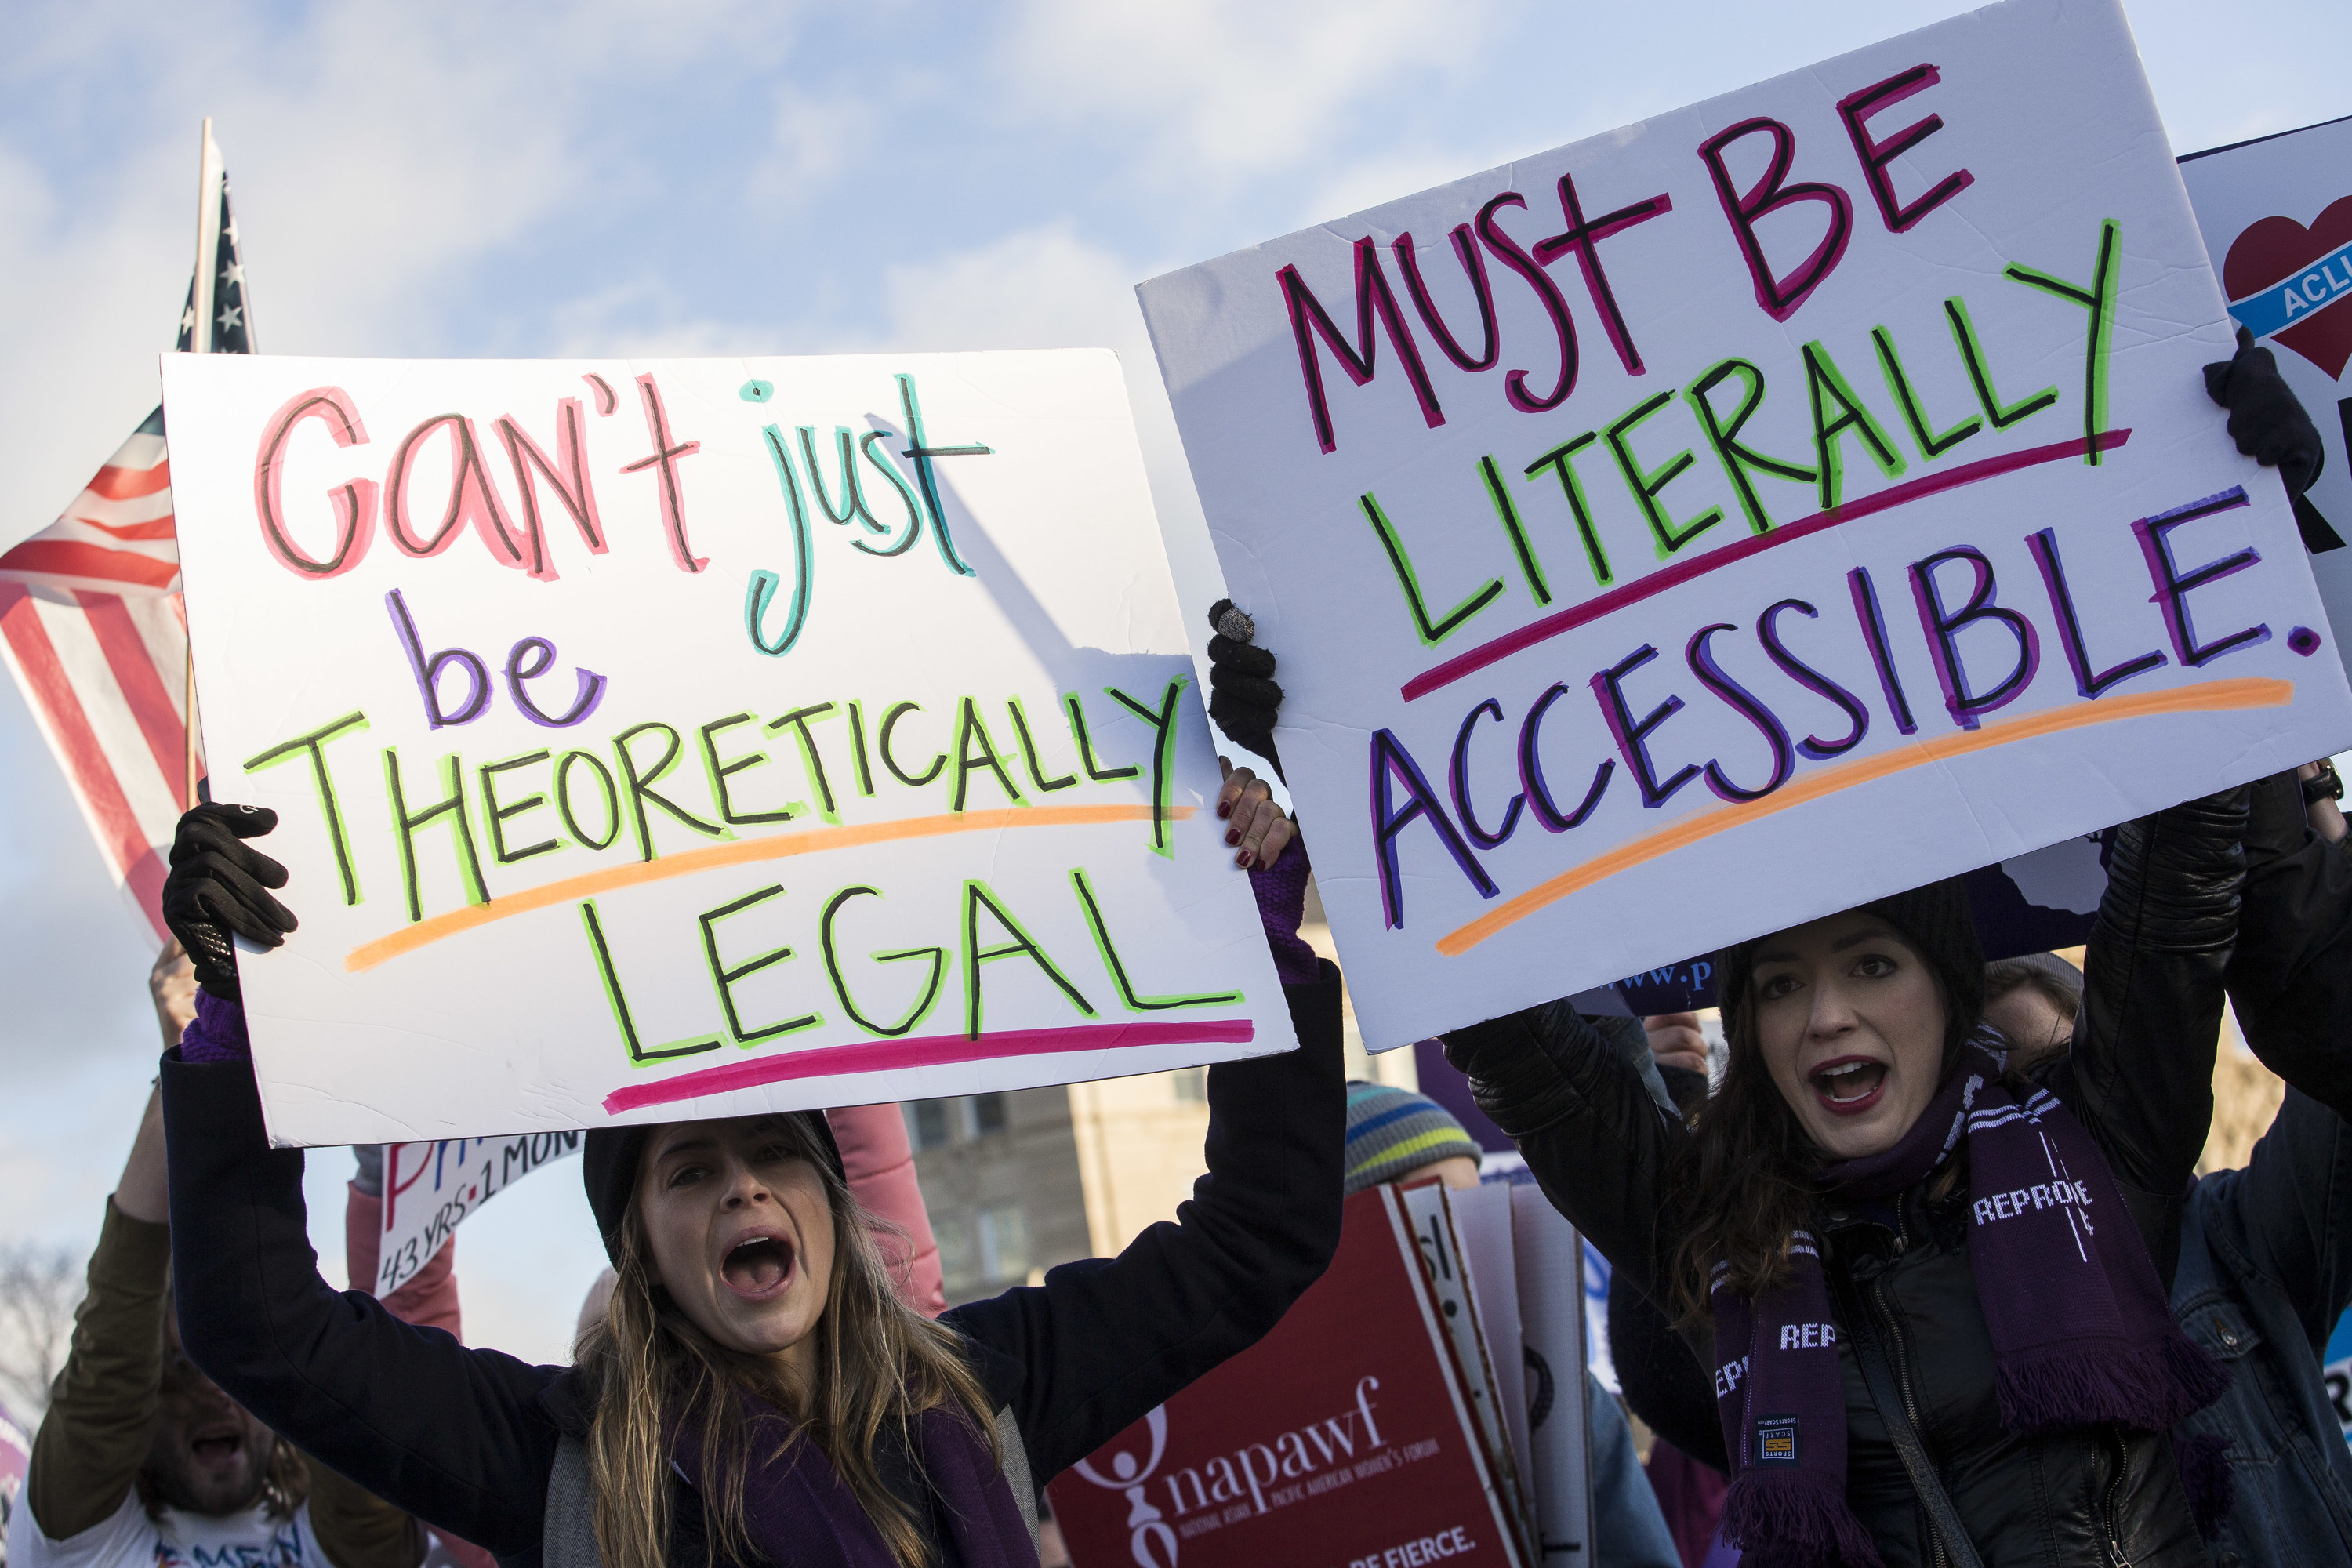 Demonstrators hold signs reading &quot;can&#x27;t just be theoretically legal&quot; and &quot;must be literally accessible&quot;